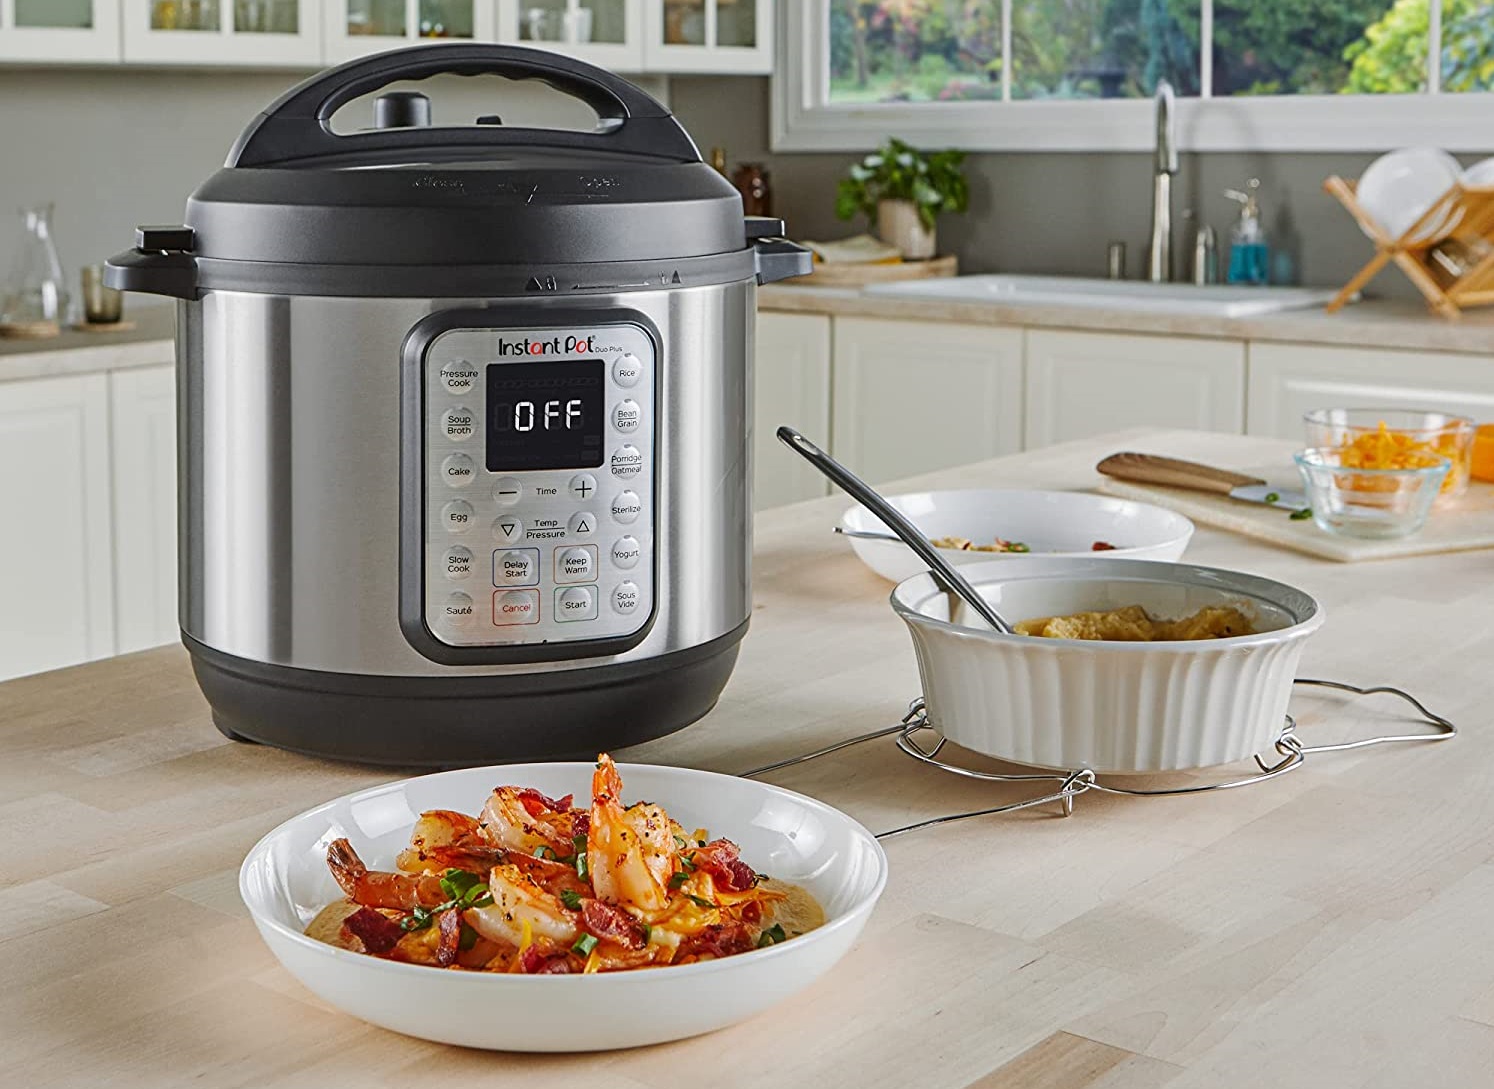 https://www.digitaltrends.com/wp-content/uploads/2021/06/instant-pot-duo-plus-multi-cooker-on-the-counter.jpg?fit=720%2C720&p=1